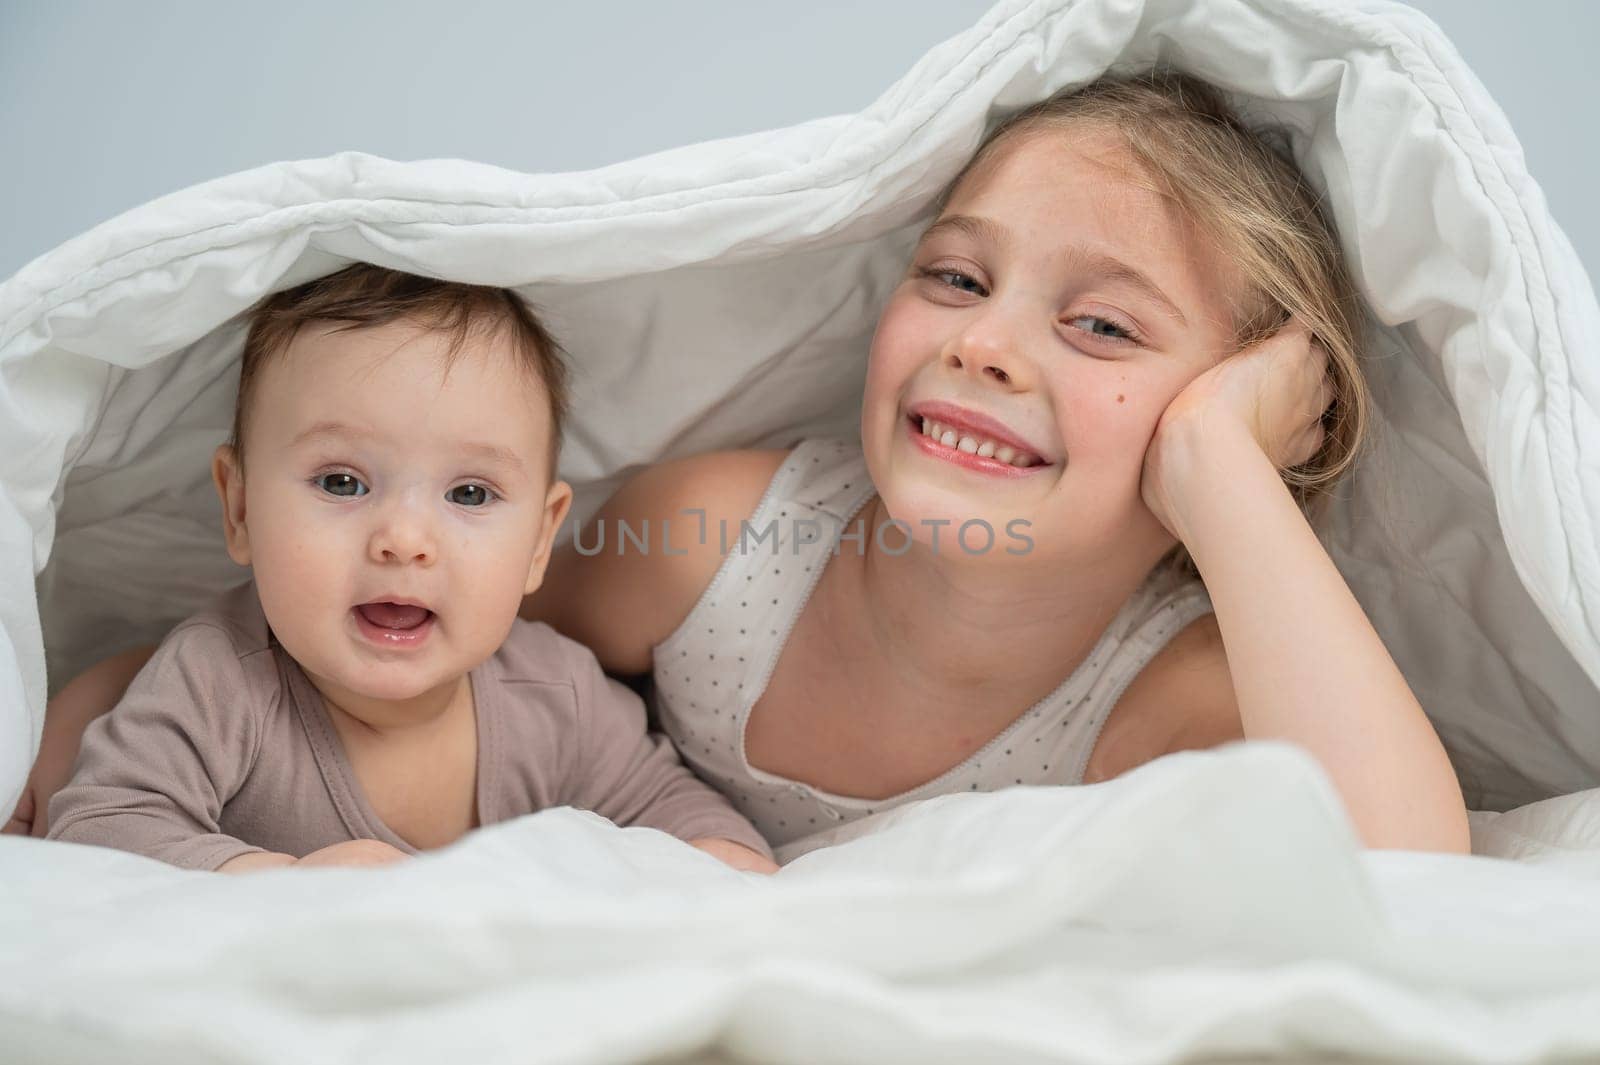 Little girl and her newborn brother hiding under the blanket. by mrwed54